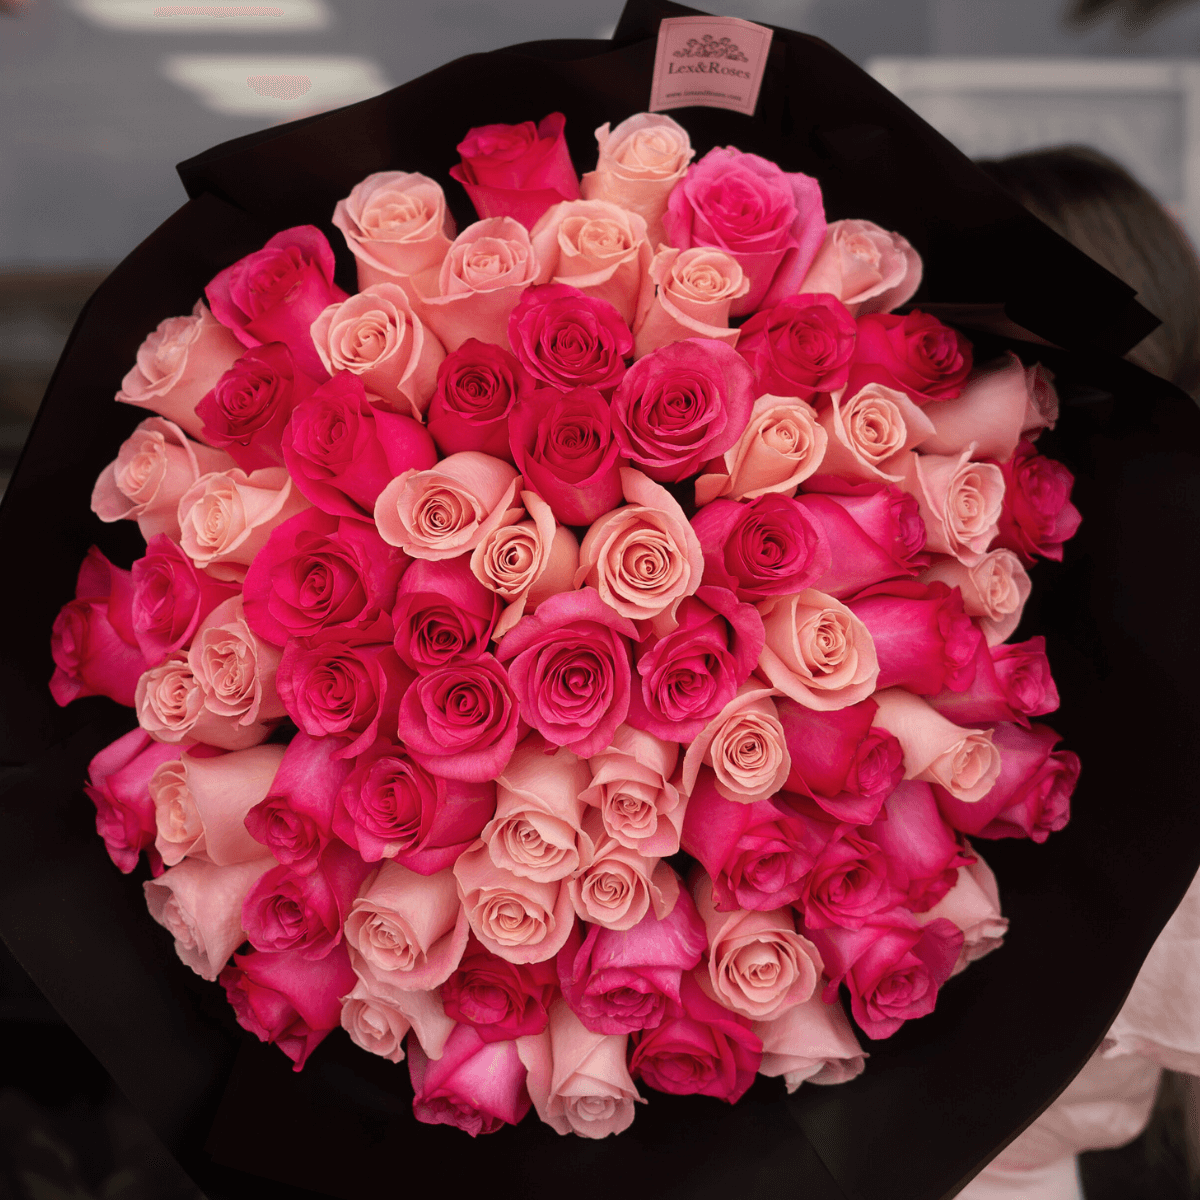 100 Hot Pink Roses